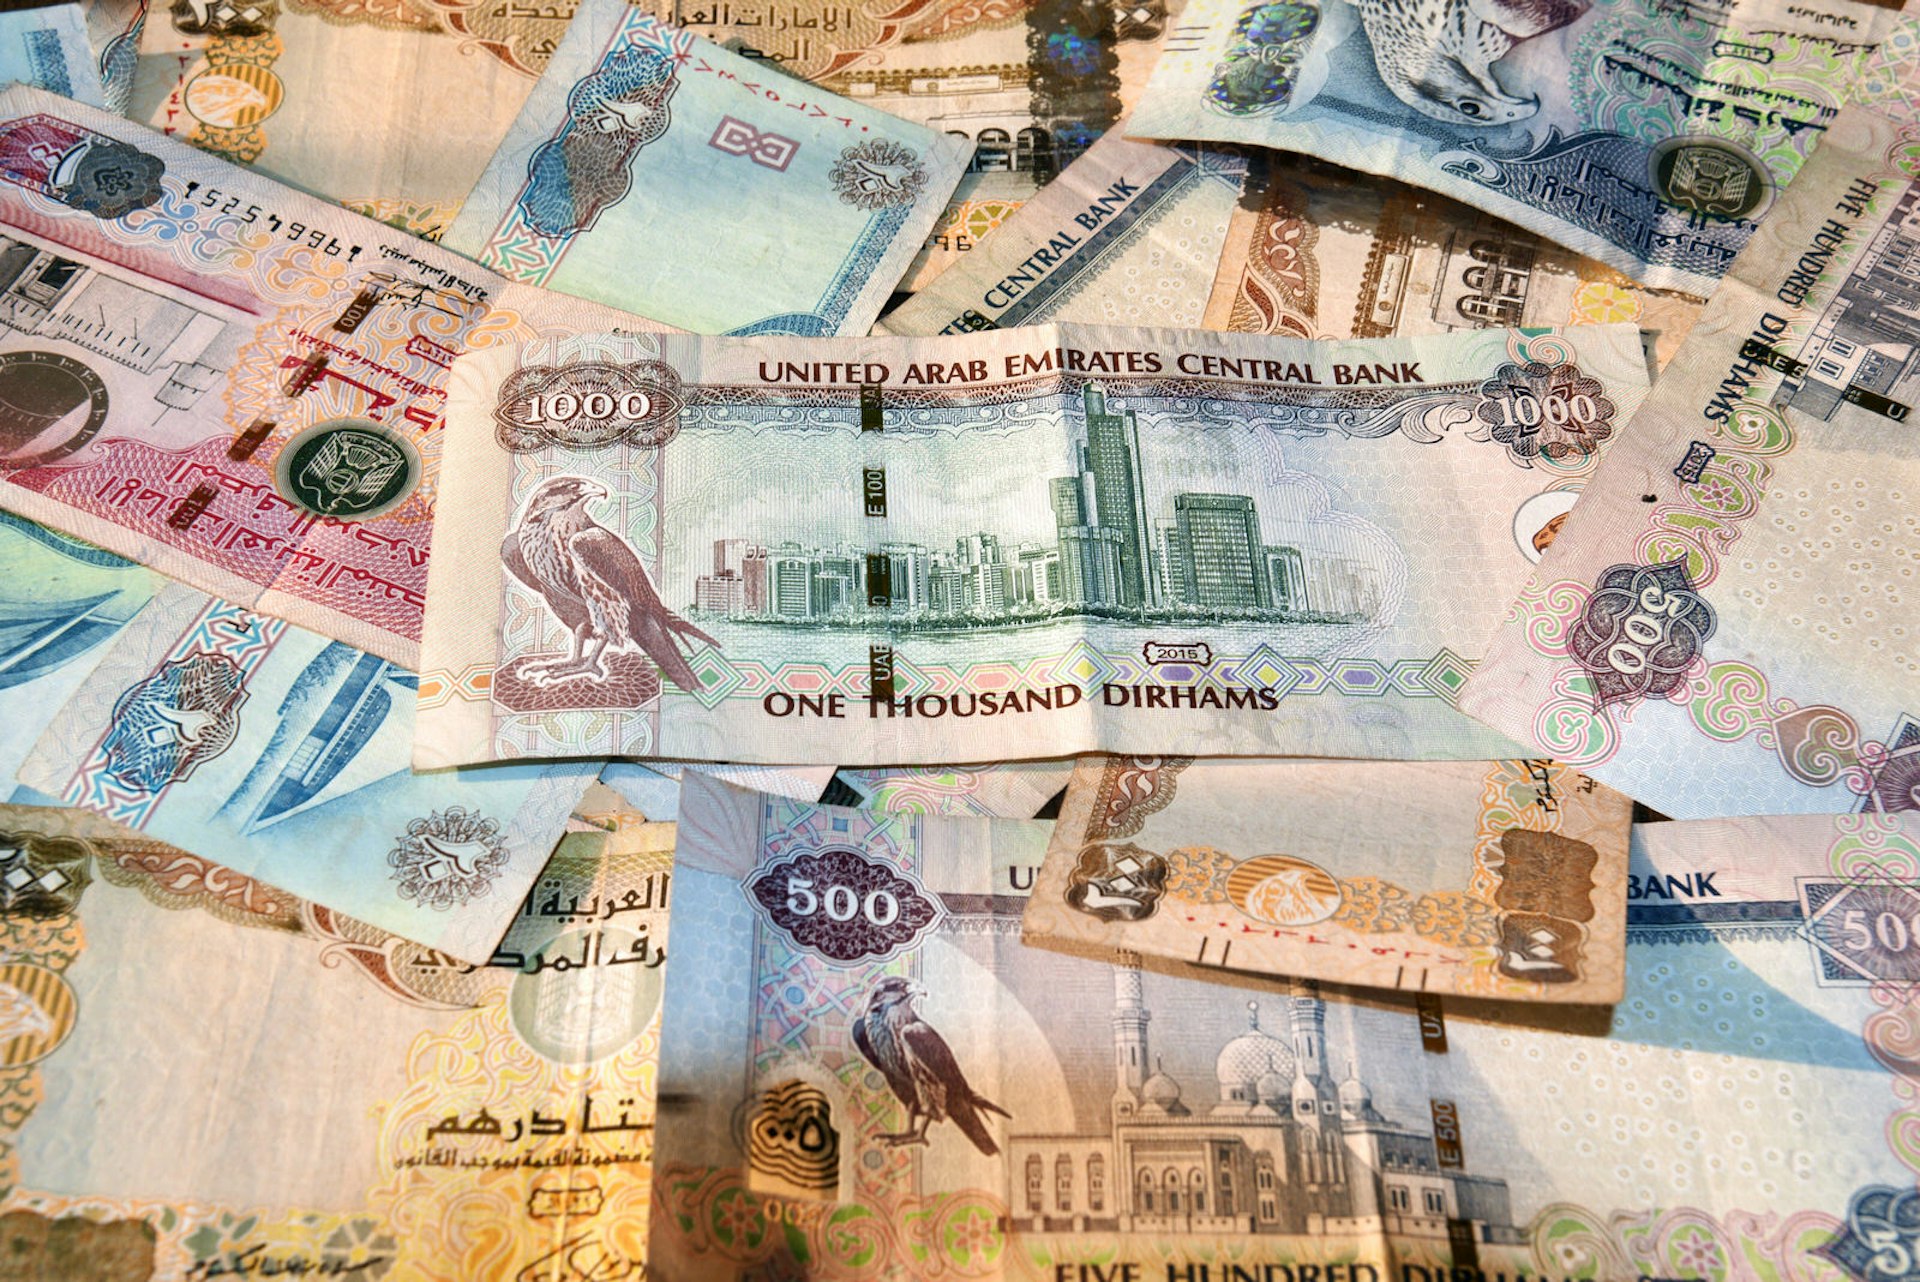 United Arab Emirates currency notes spread on table 